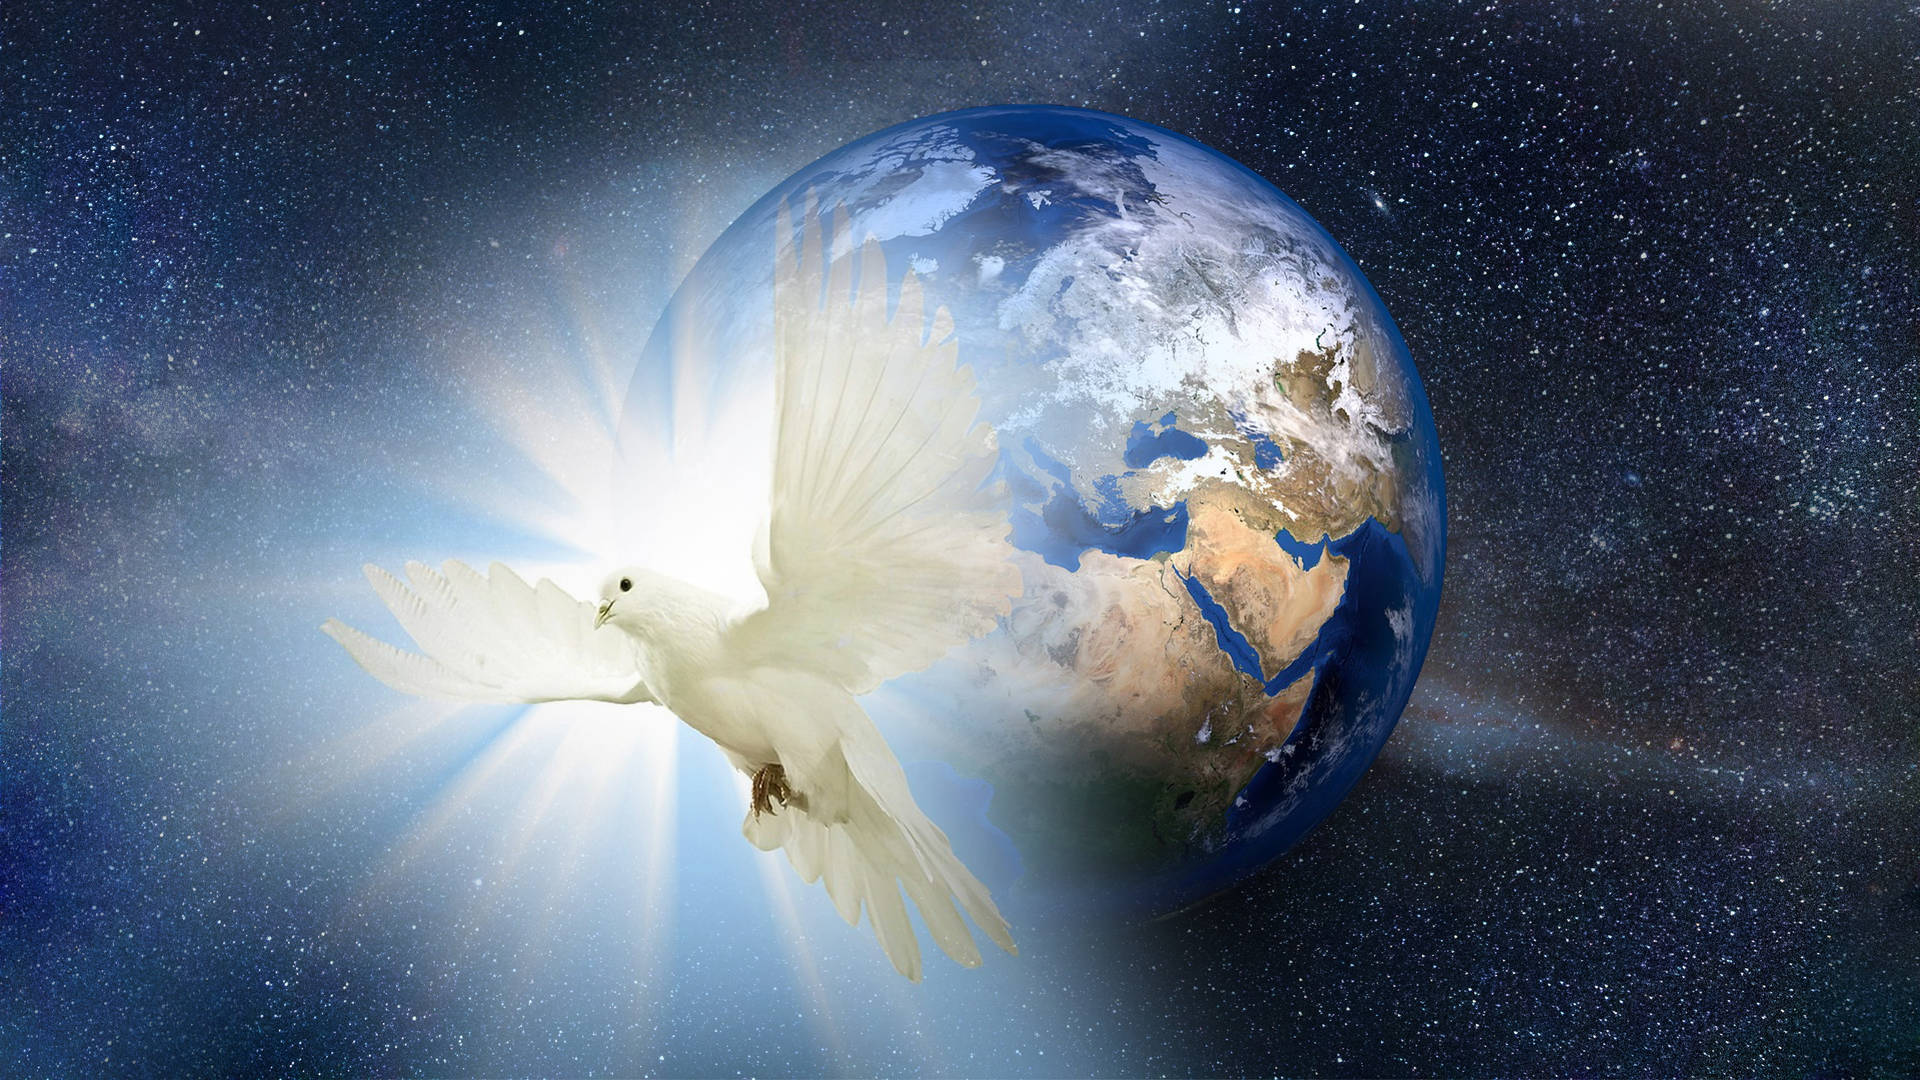 White Dove And Space Background